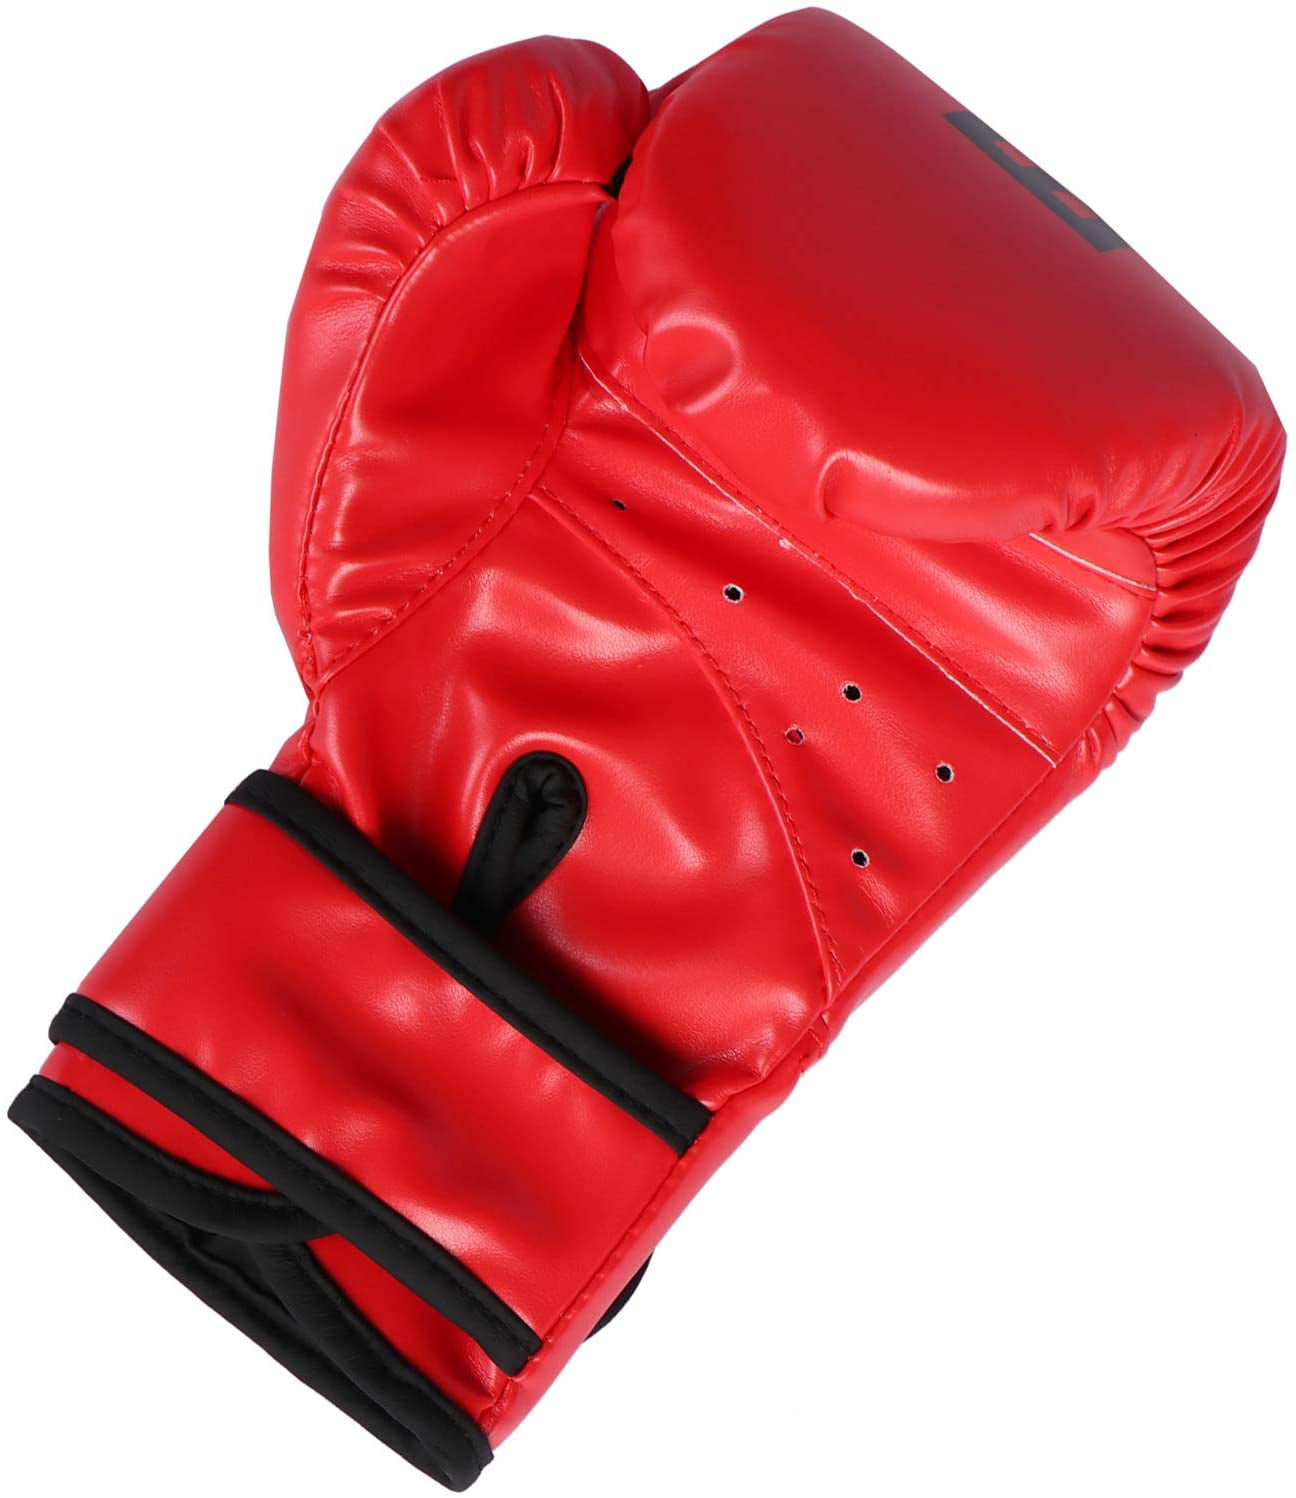 Cartoon Sparring Training Mitts Junior Punch PU Leather Protective Youth Boxing Gloves Training Boxing Gloves for Kids Age 3-12 FFEM Kids Boxing Gloves 